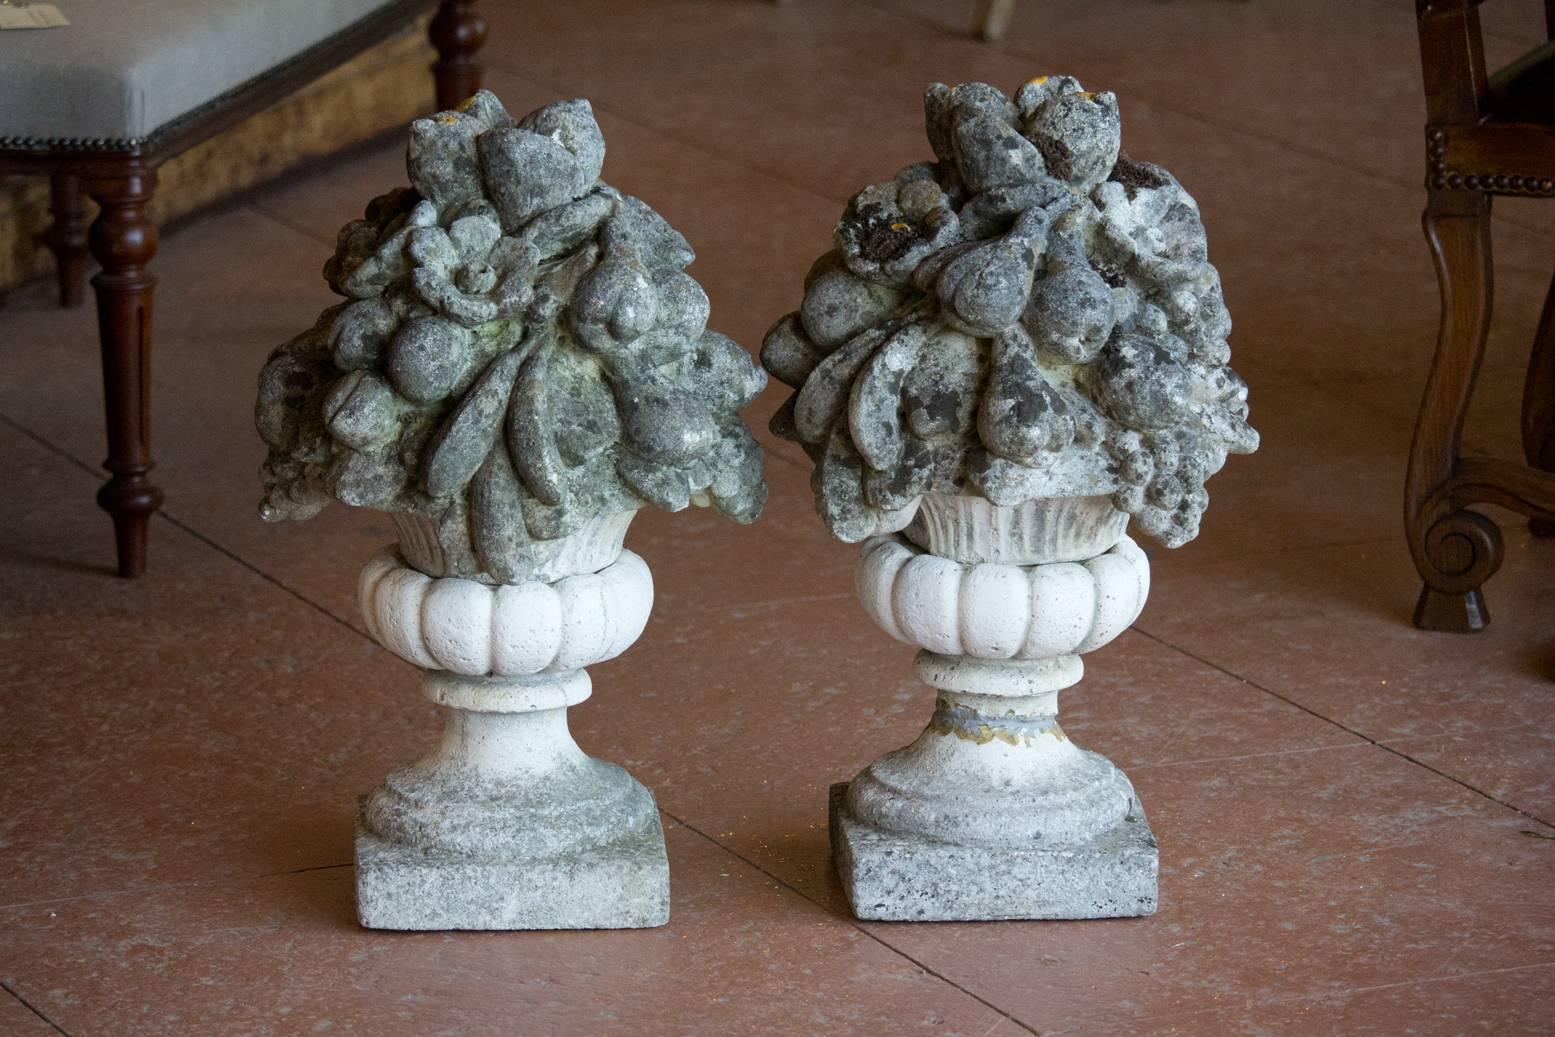 Pair of antique English stone fruit bowl finials with beautiful patina.